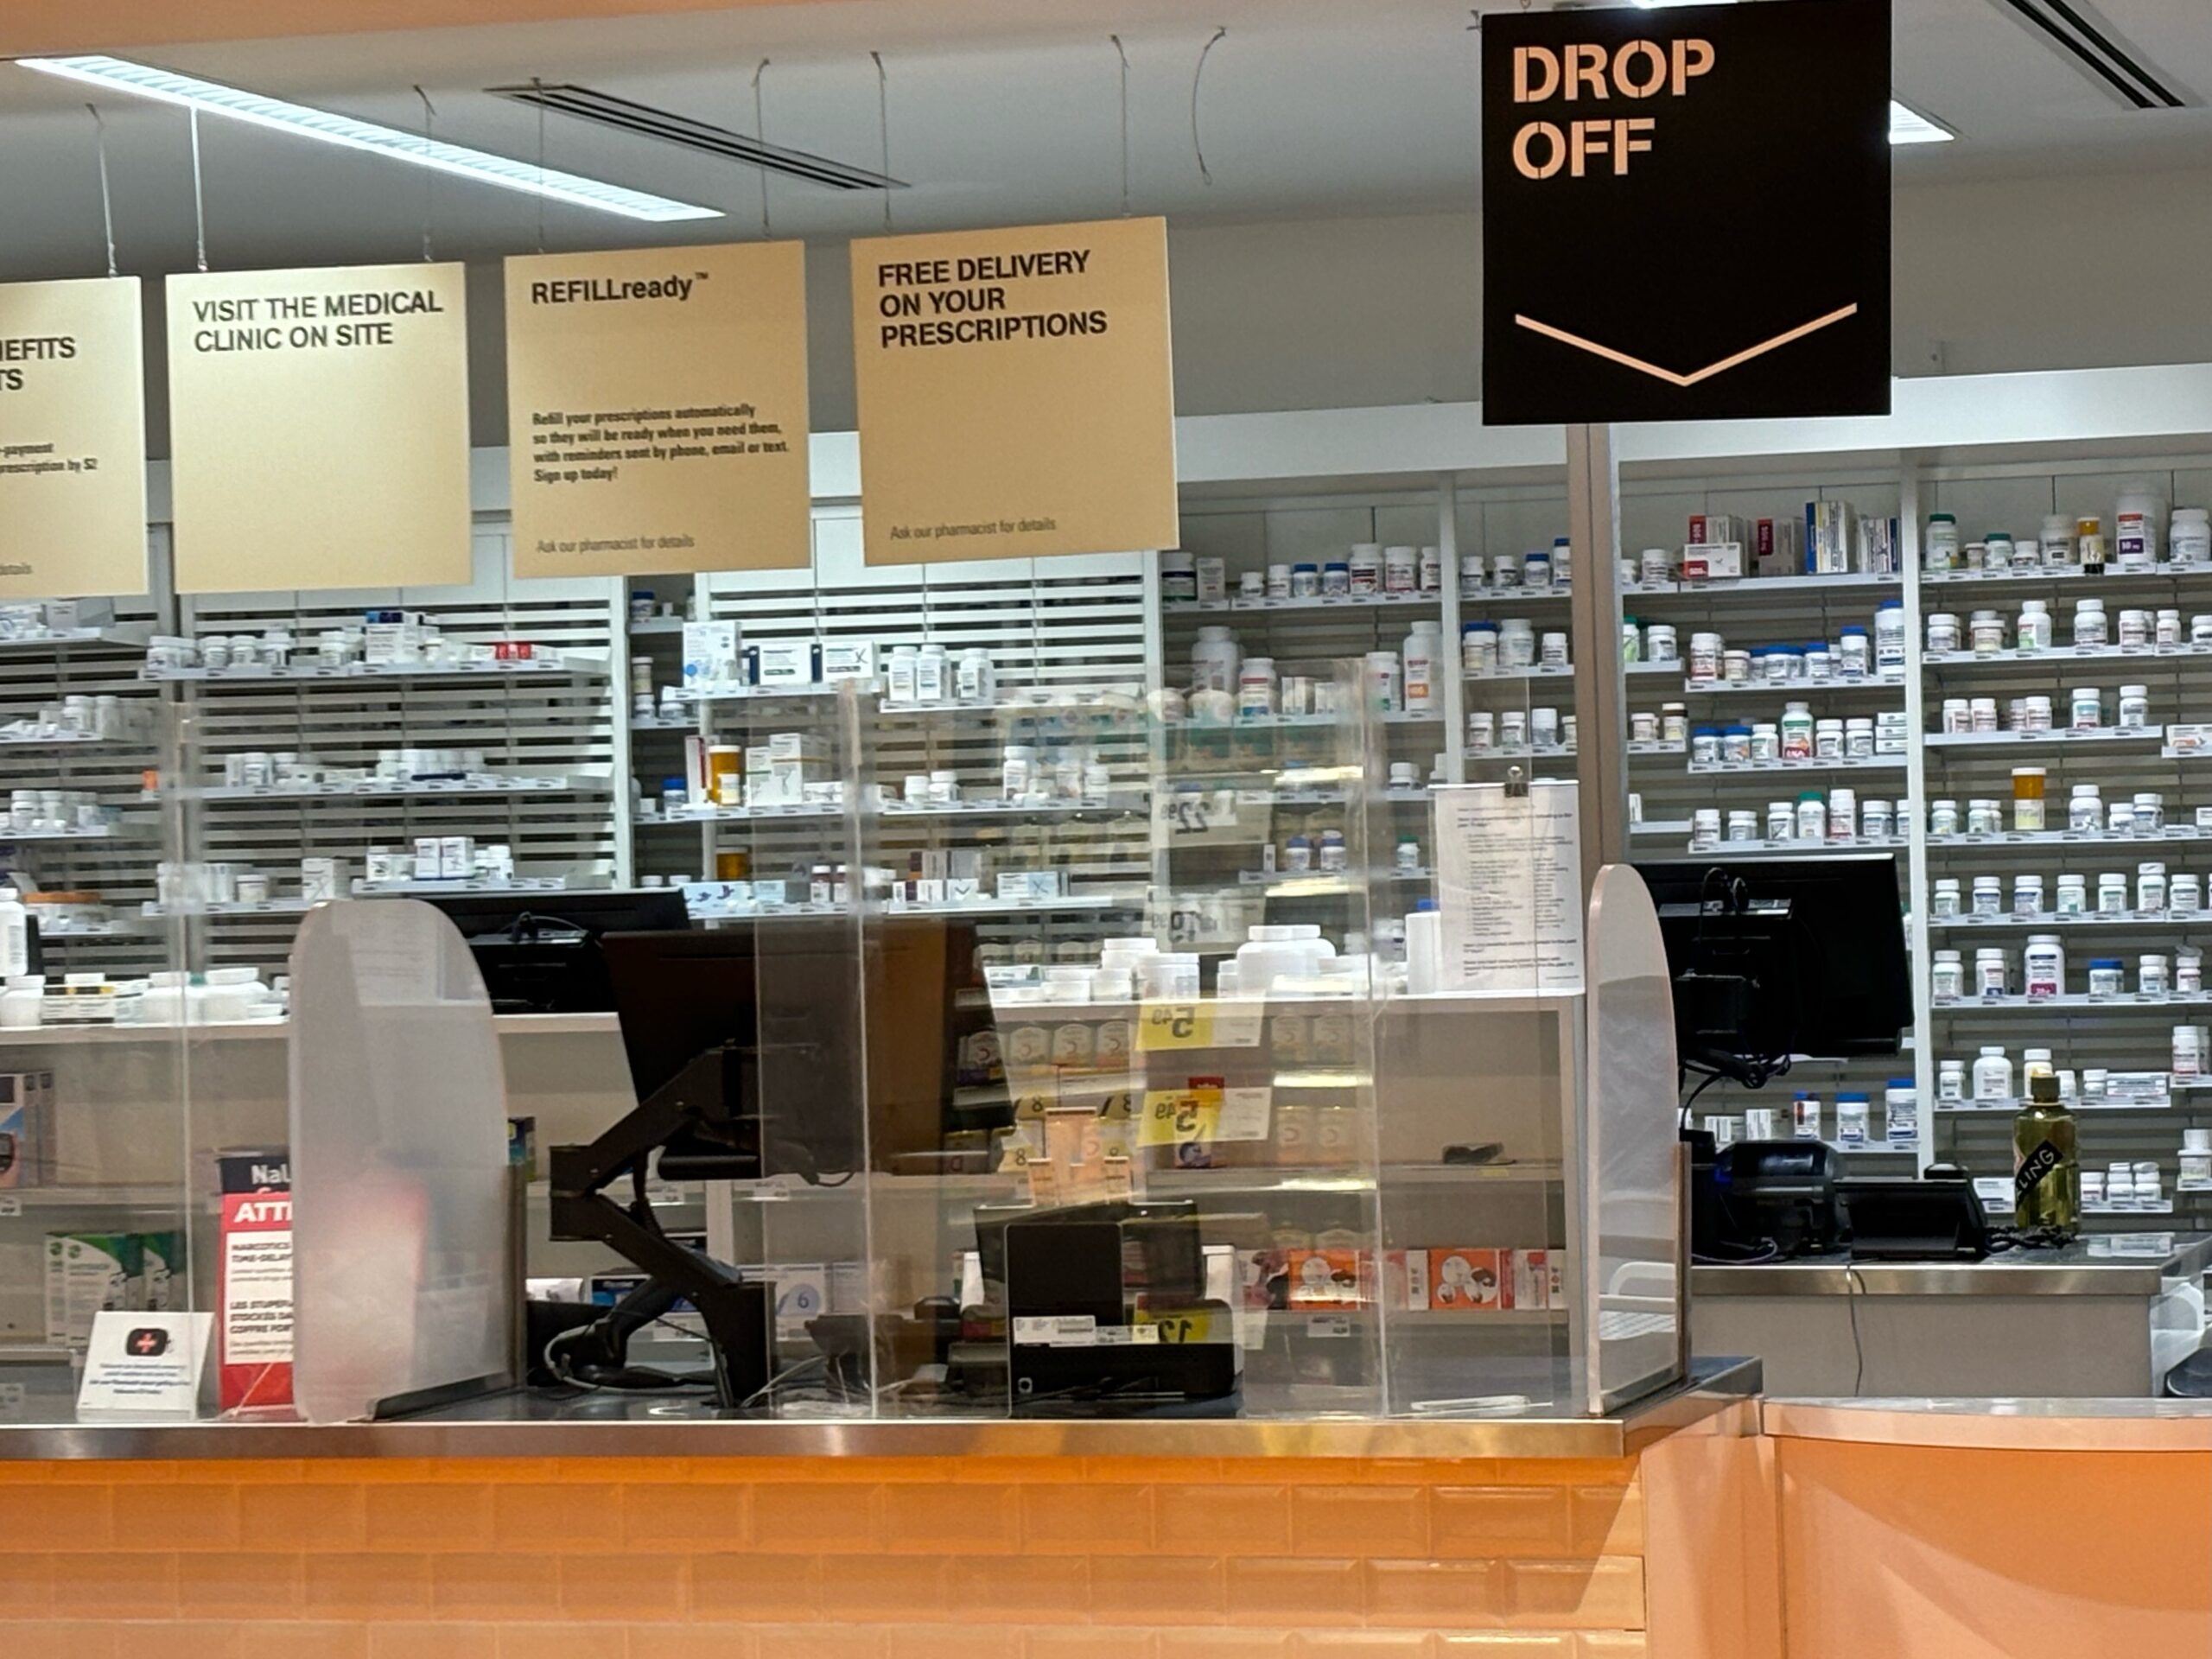 A photo showing a pharmacy with glass, and prescription bottles on shelves.